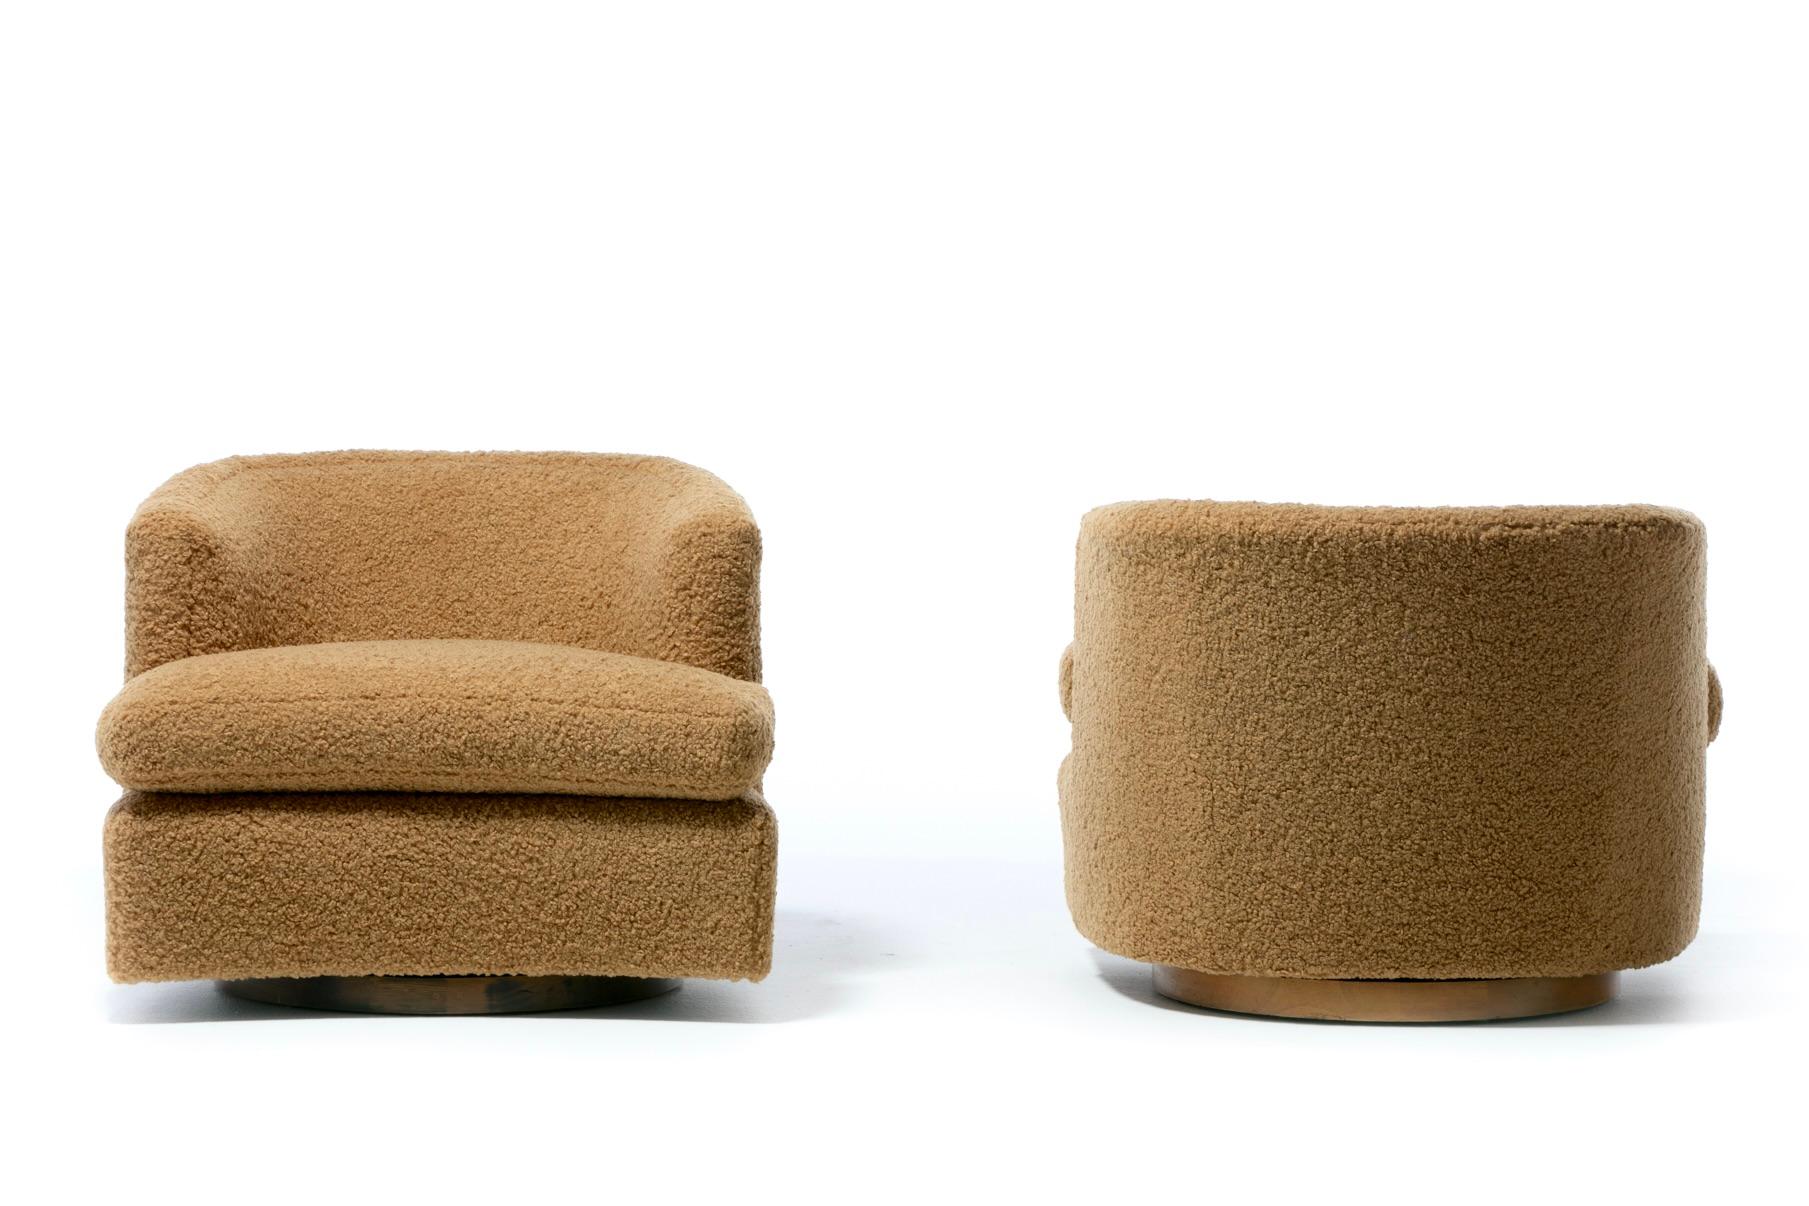 Harvey Probber Swivel Lounge Chairs Upholstered in Camel Teddy Bear C. 1955 In Good Condition For Sale In Saint Louis, MO